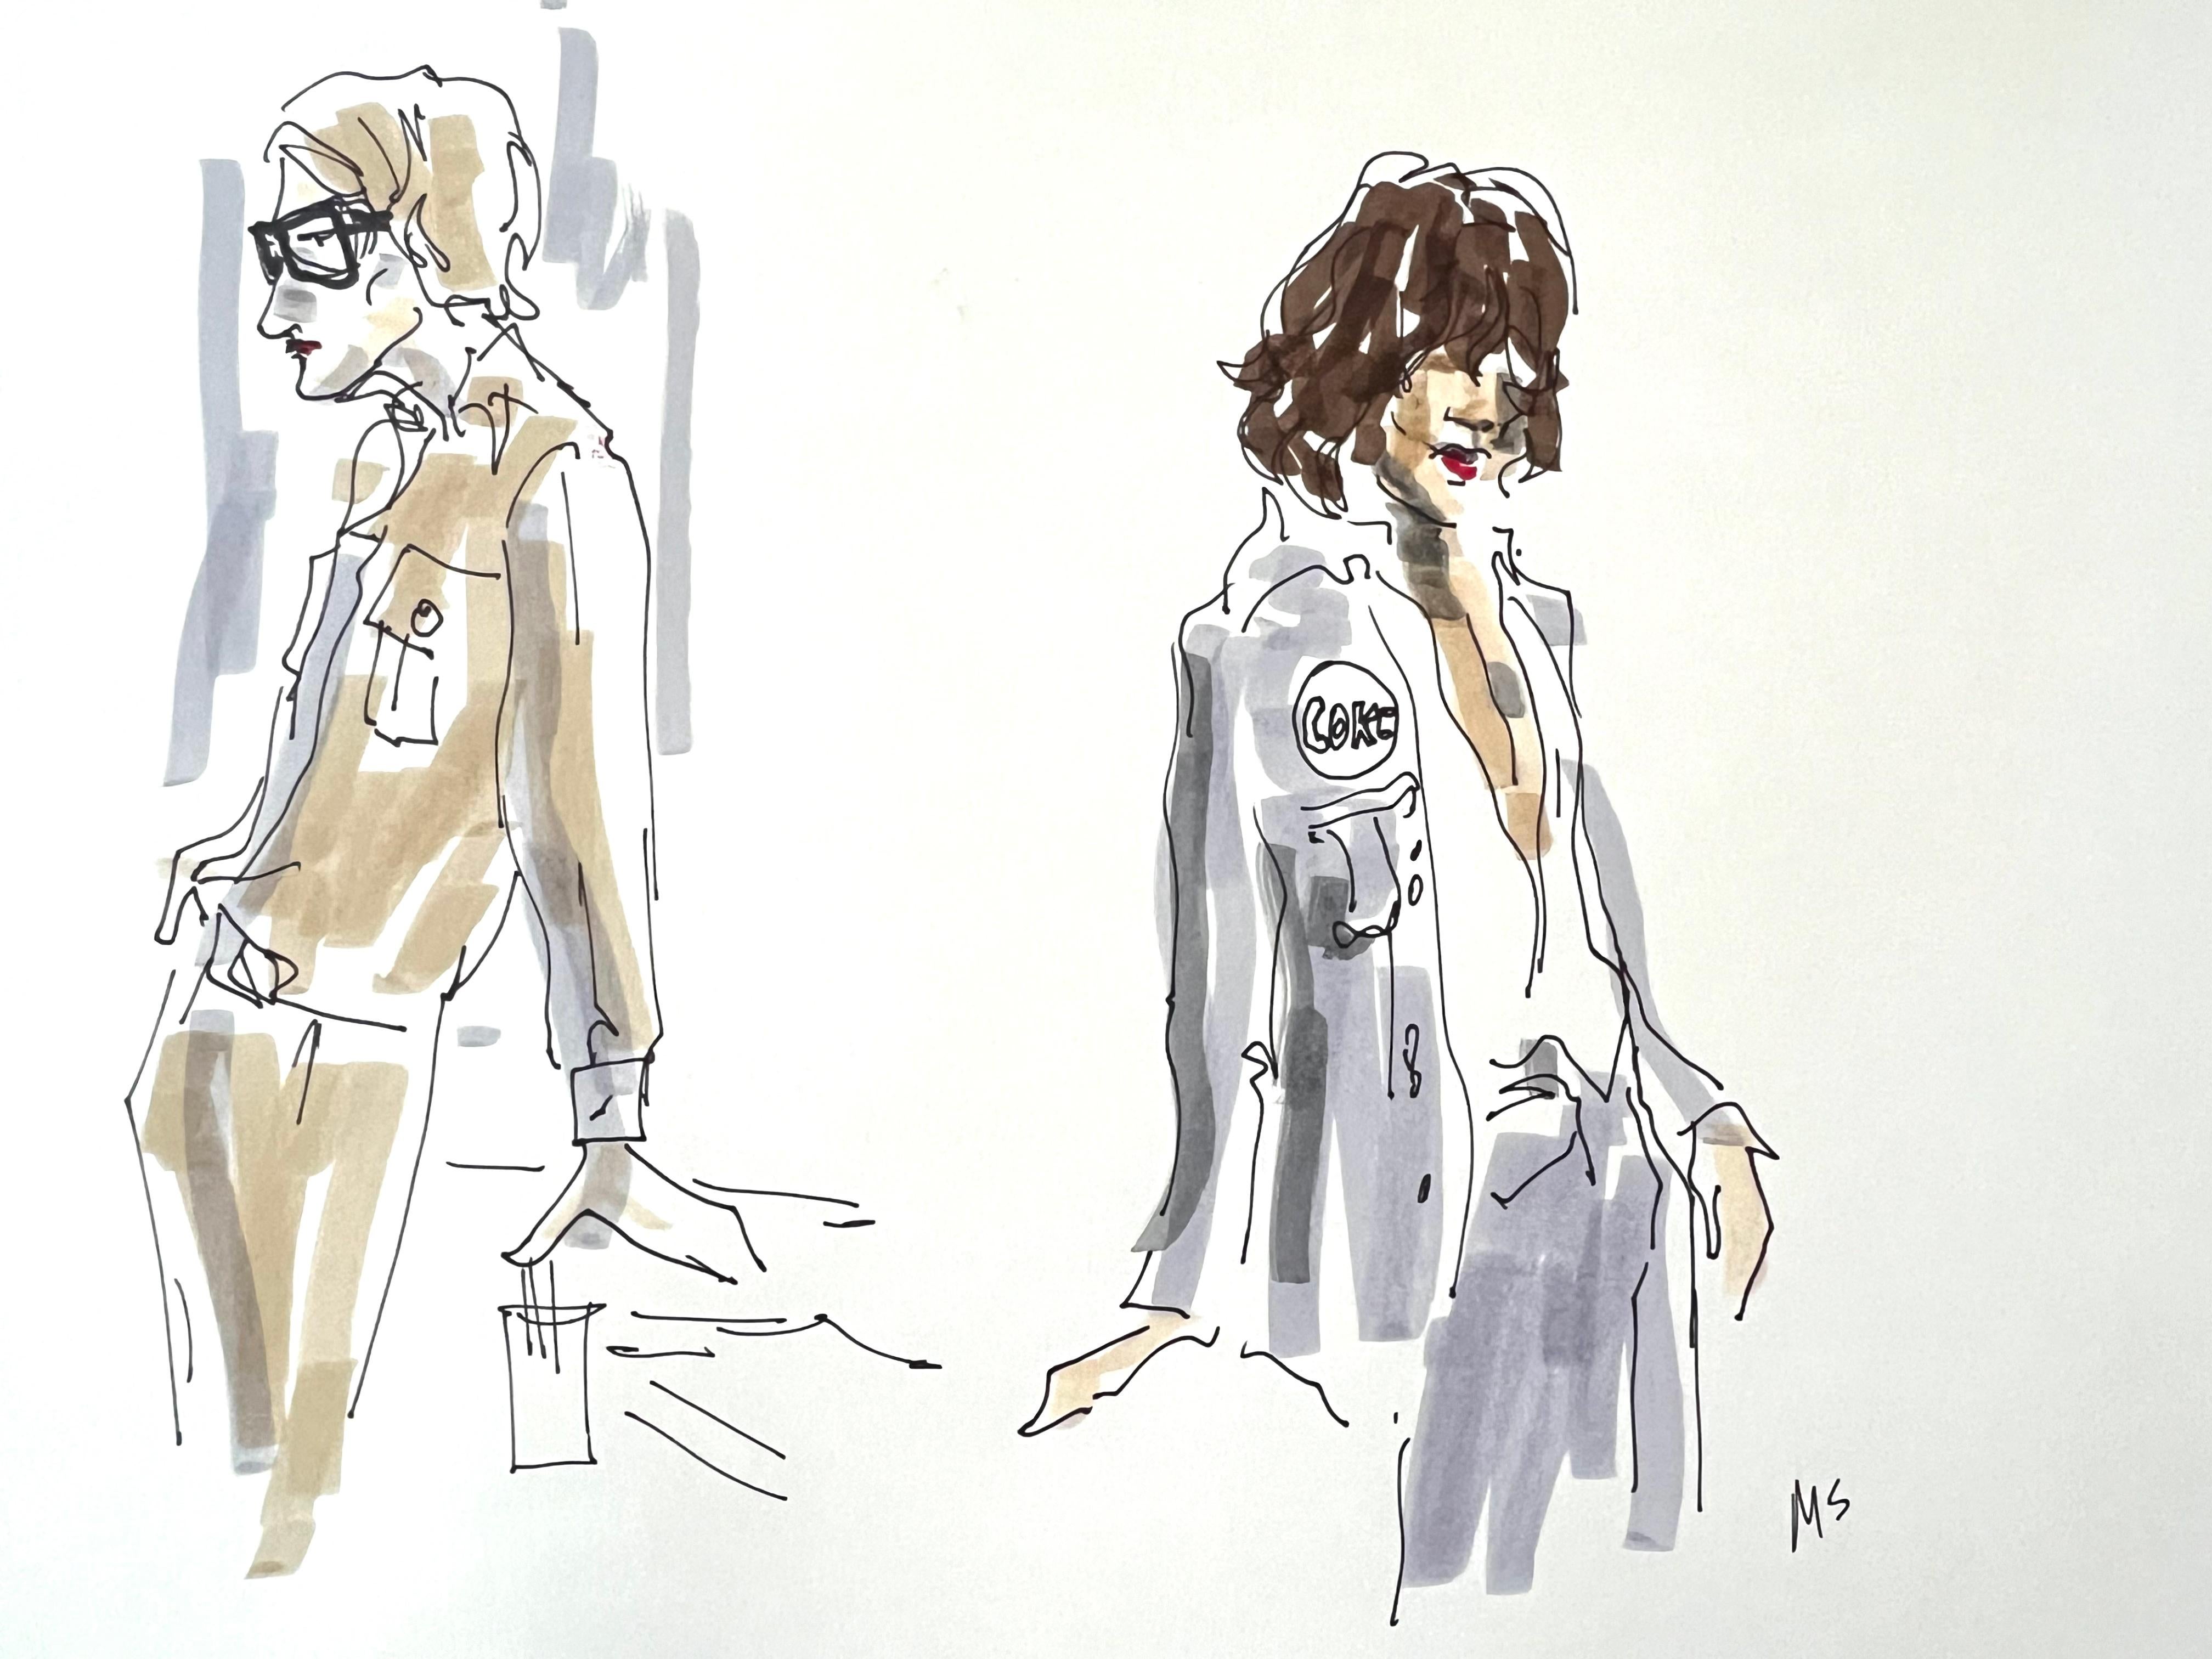 Manuel Santelices Figurative Art - Study for Yves Saint Laurent and Mick Jagger. From the Fashion series